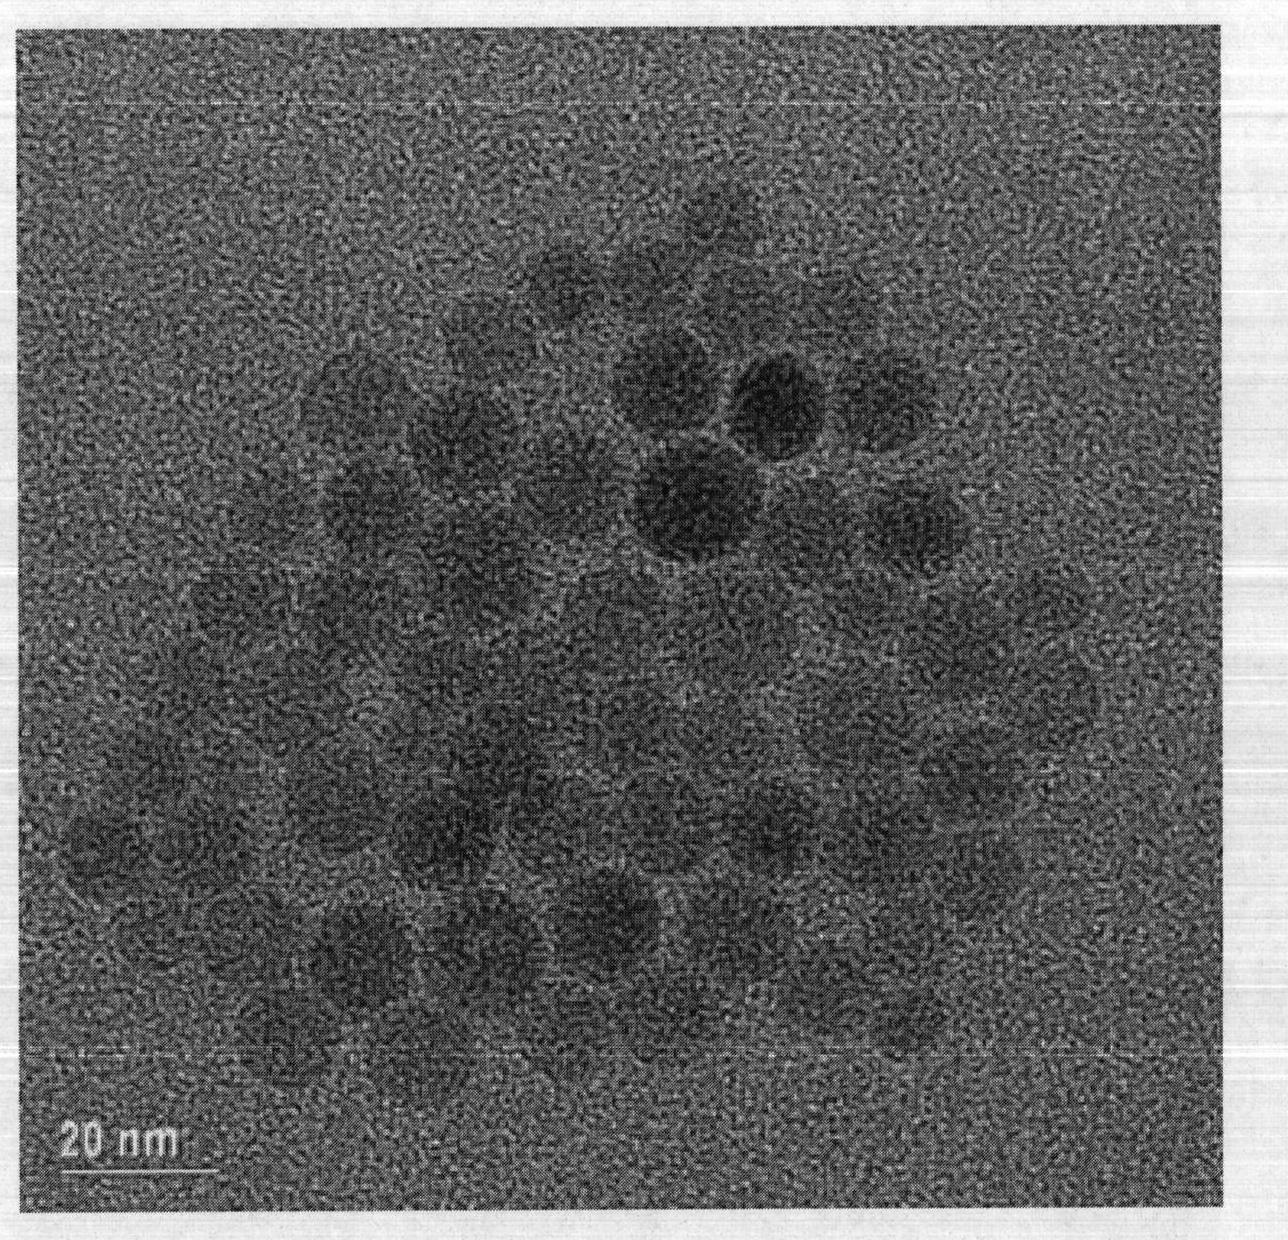 Method for preparing water-soluble rare-earth nanometer particles by super molecular self assembly